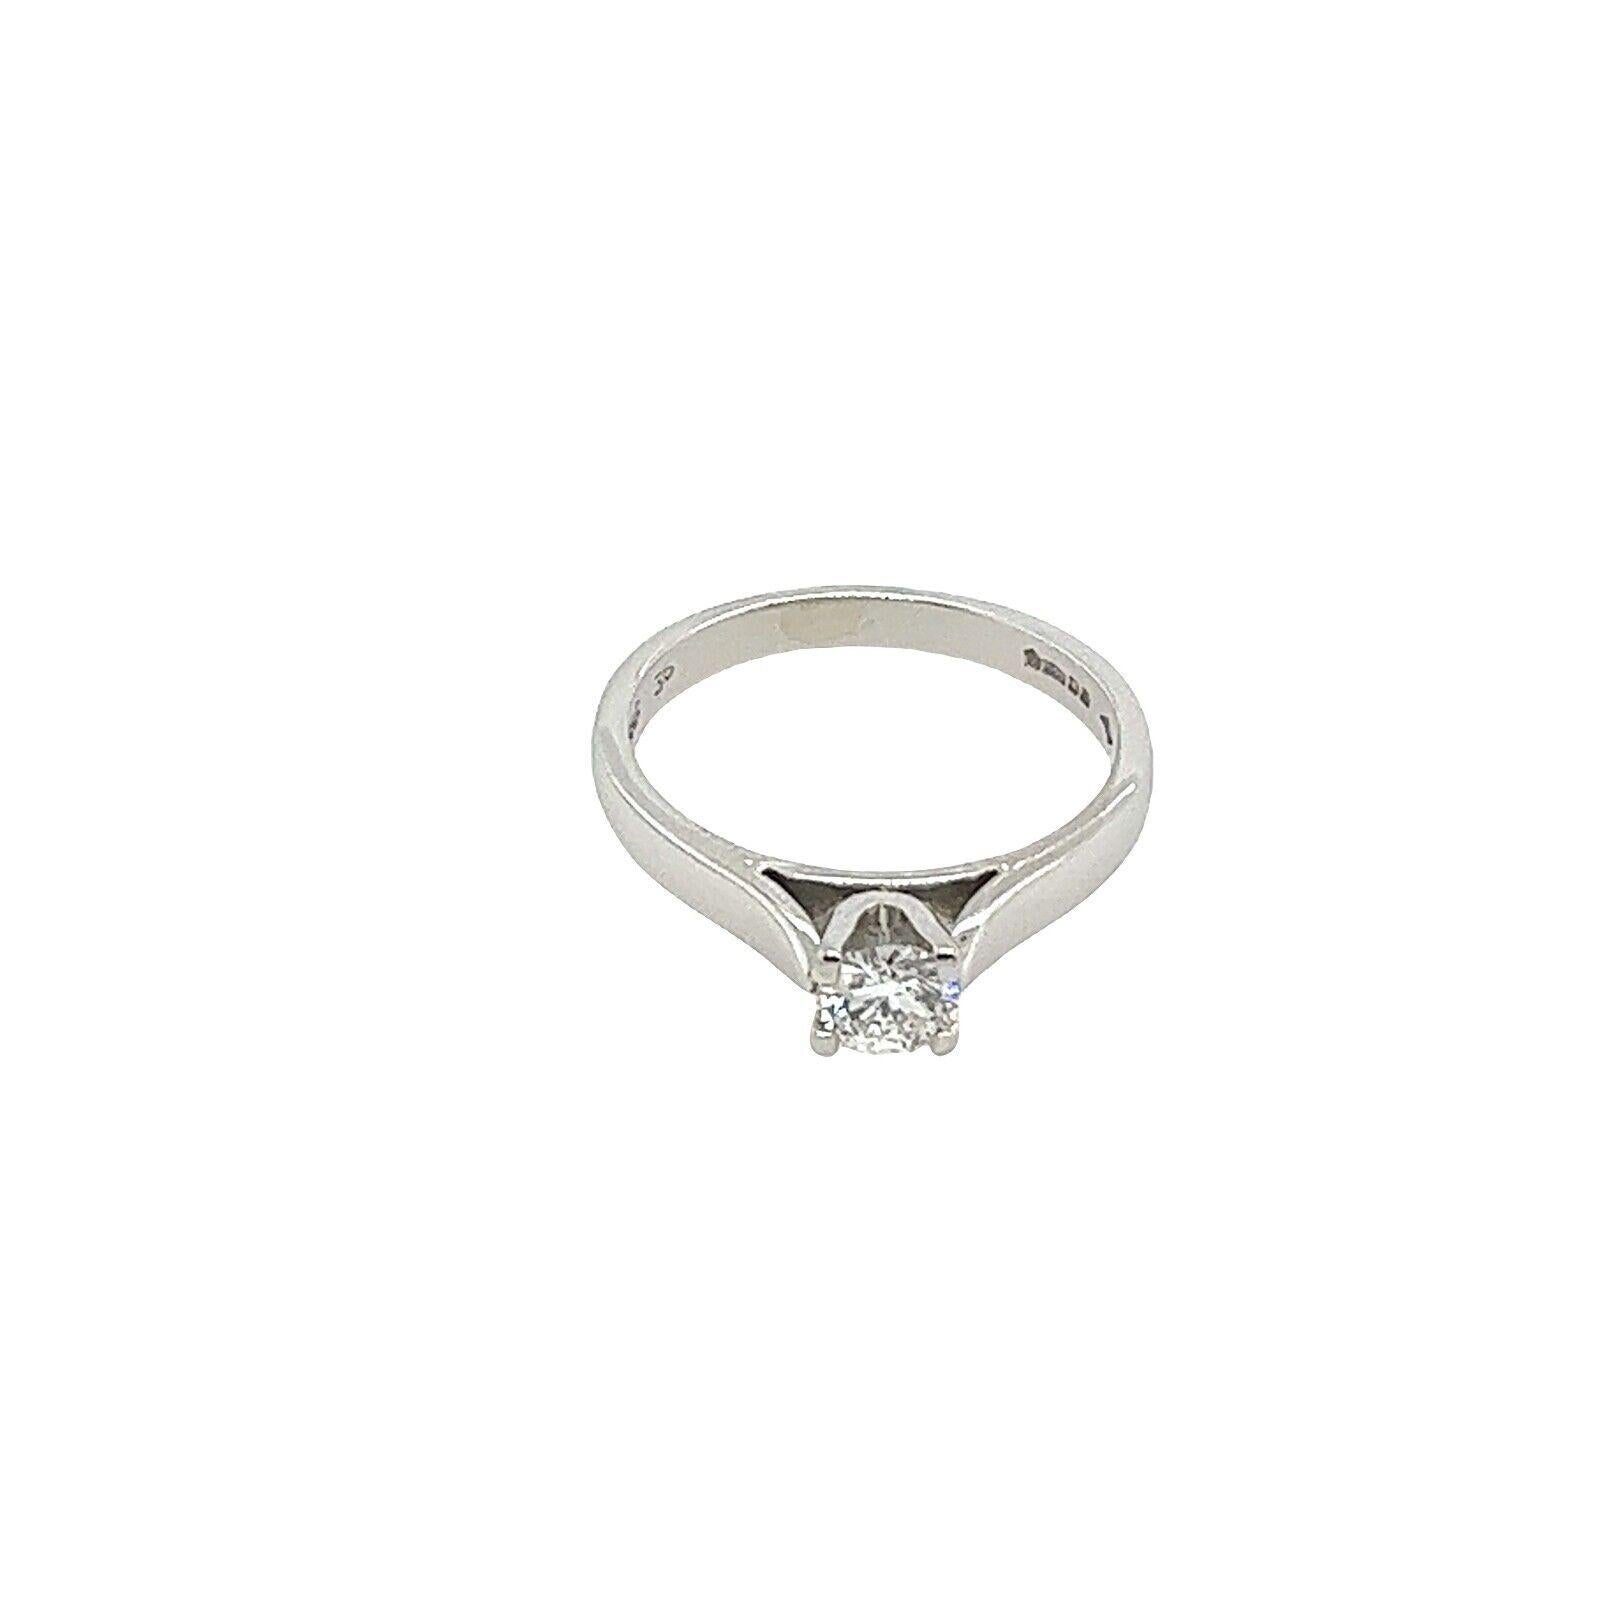 Introducing the epitome of everlasting beauty and elegance this engagement ring radiates unparalleled brilliance and charm.Crafted with sheer perfection by Beaverbrooks, this Platinum masterpiece is a true symbol of luxury and